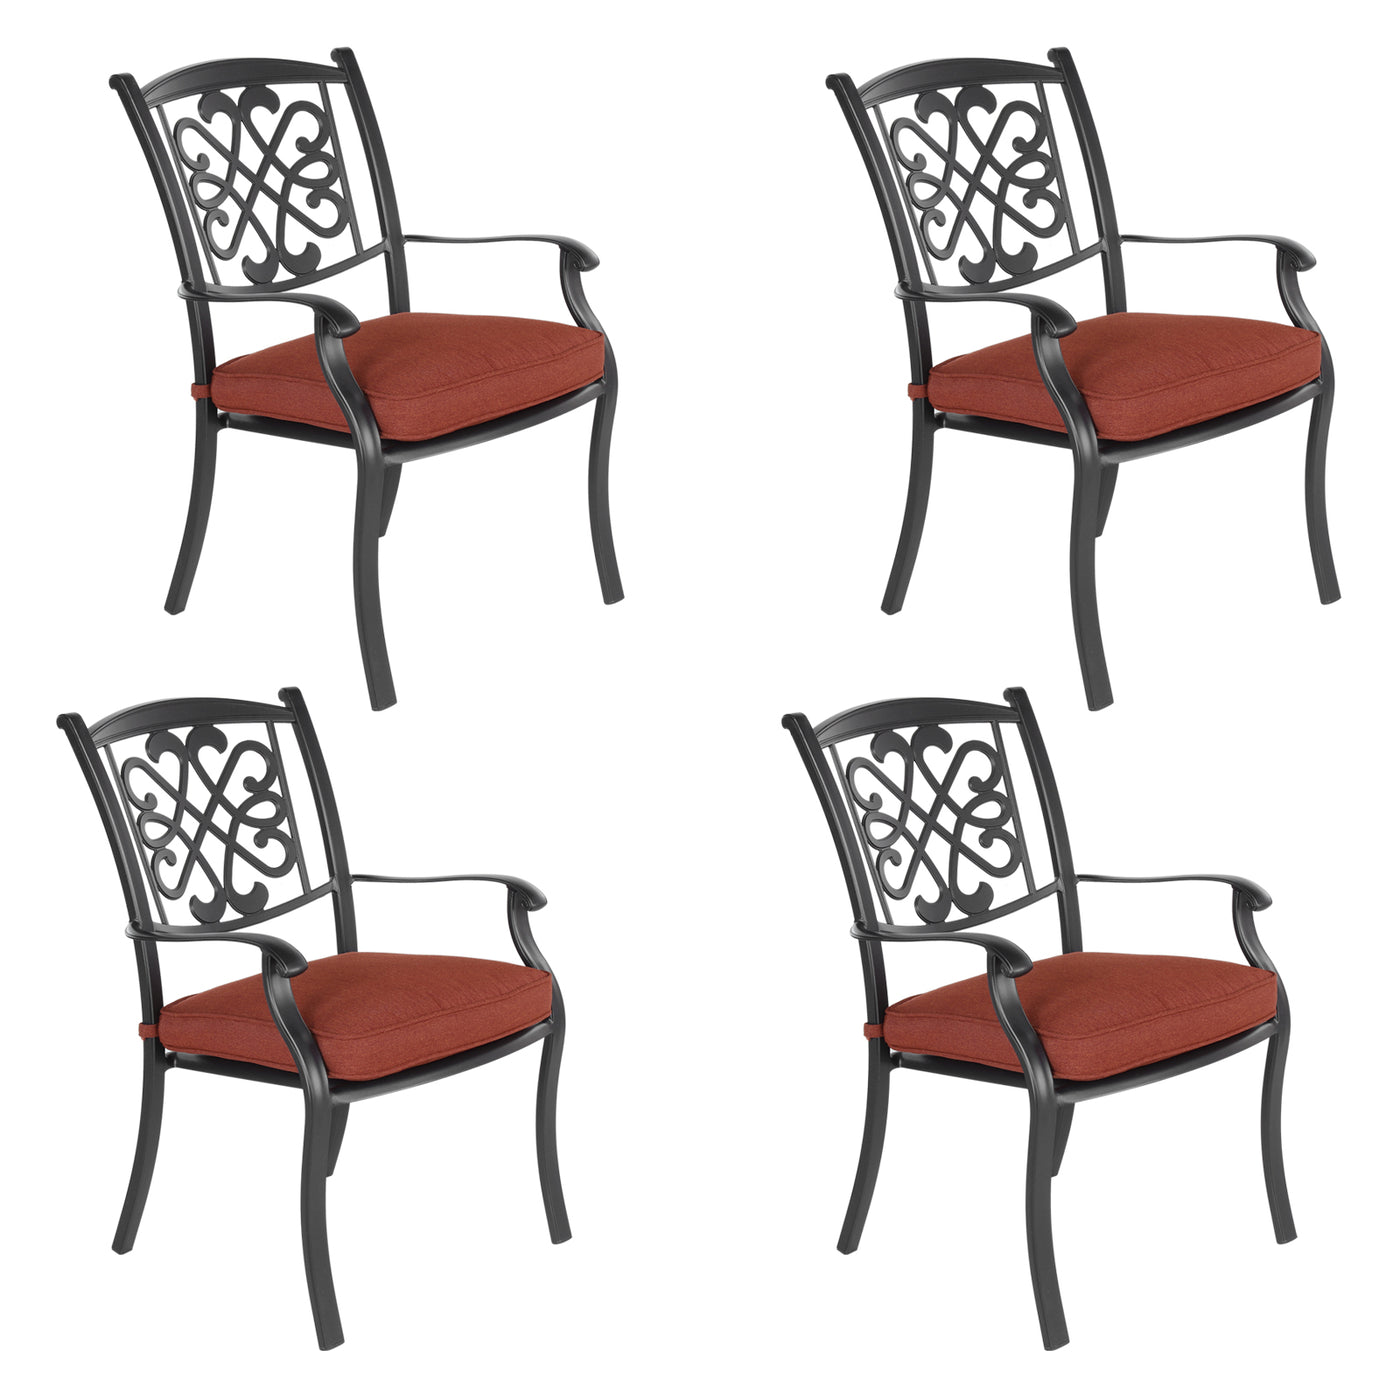 4PCS Outdoor Patio Aluminum Chairs with Cushions for Bistro, Backyard, Garden